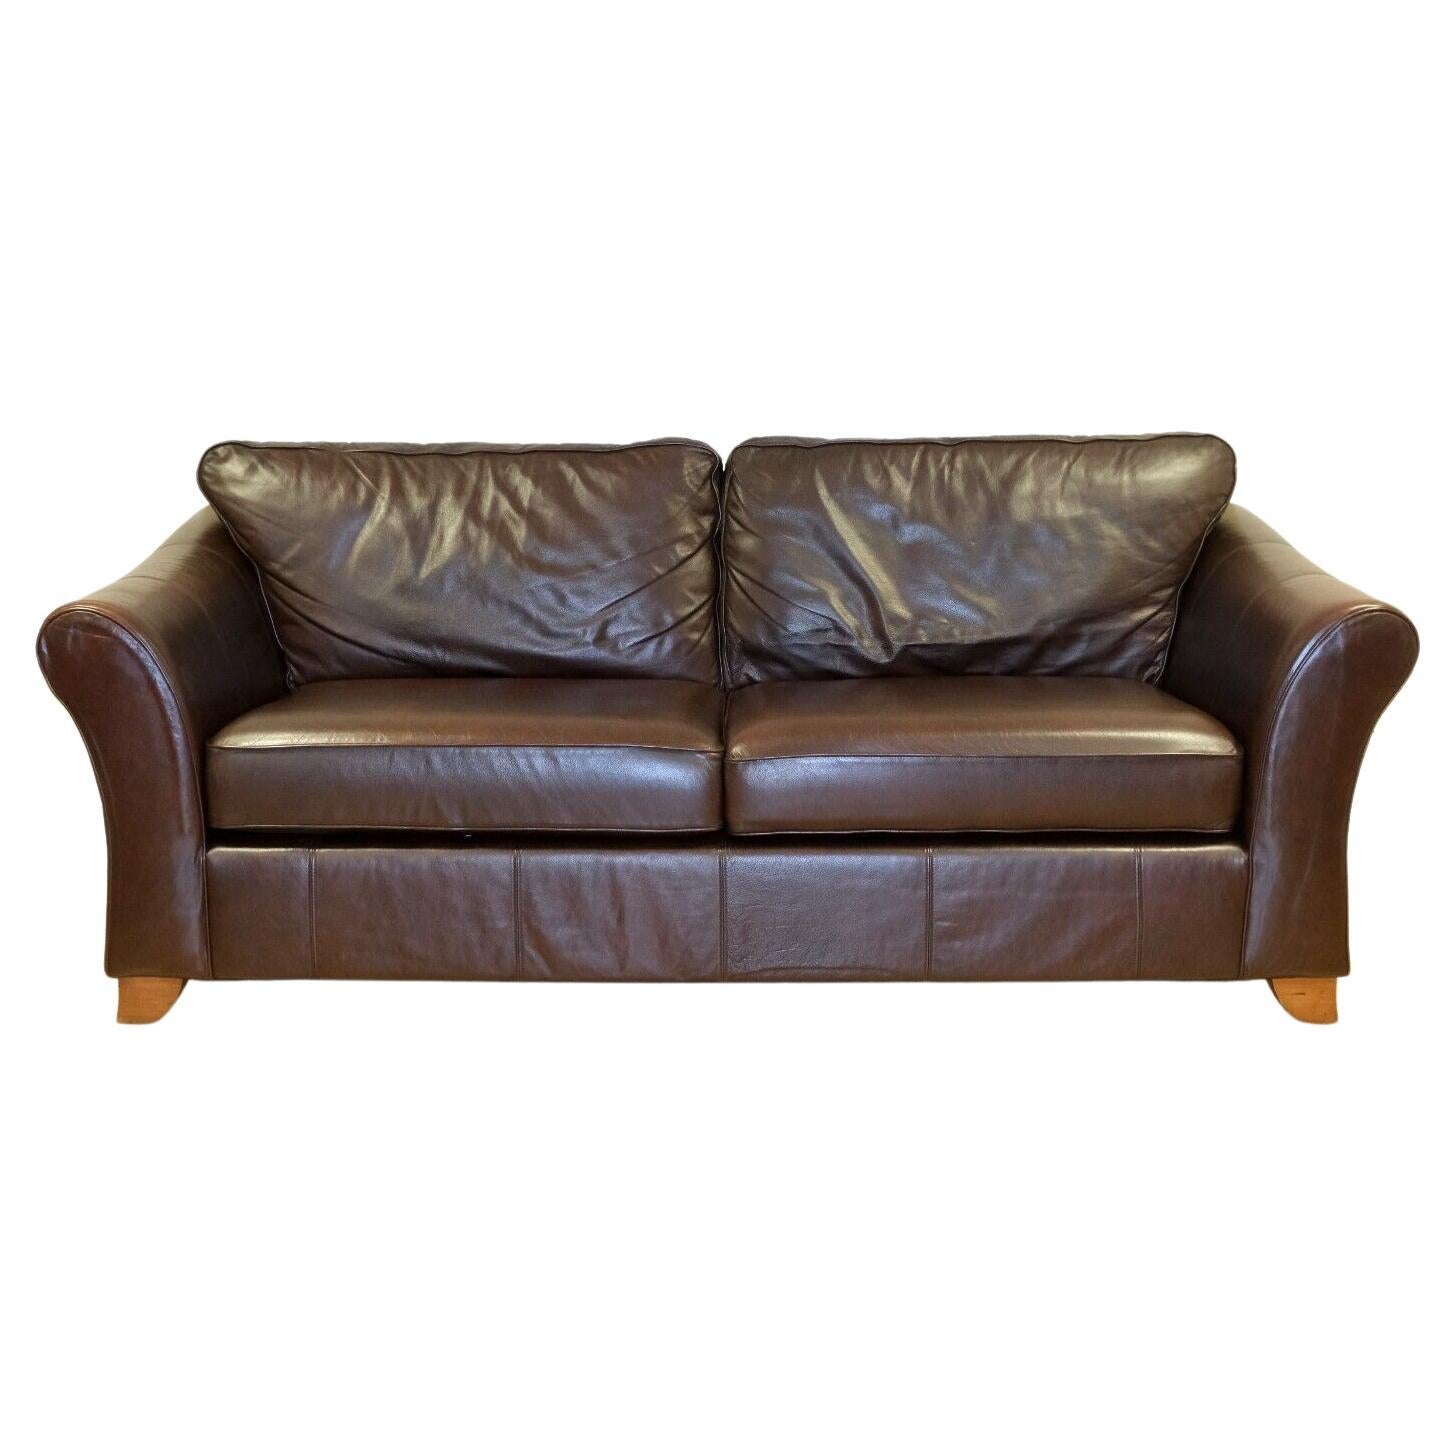 Lovely Marks & Spencer Abbey Brown Leather Two Seater Sofa on Wooden Feet